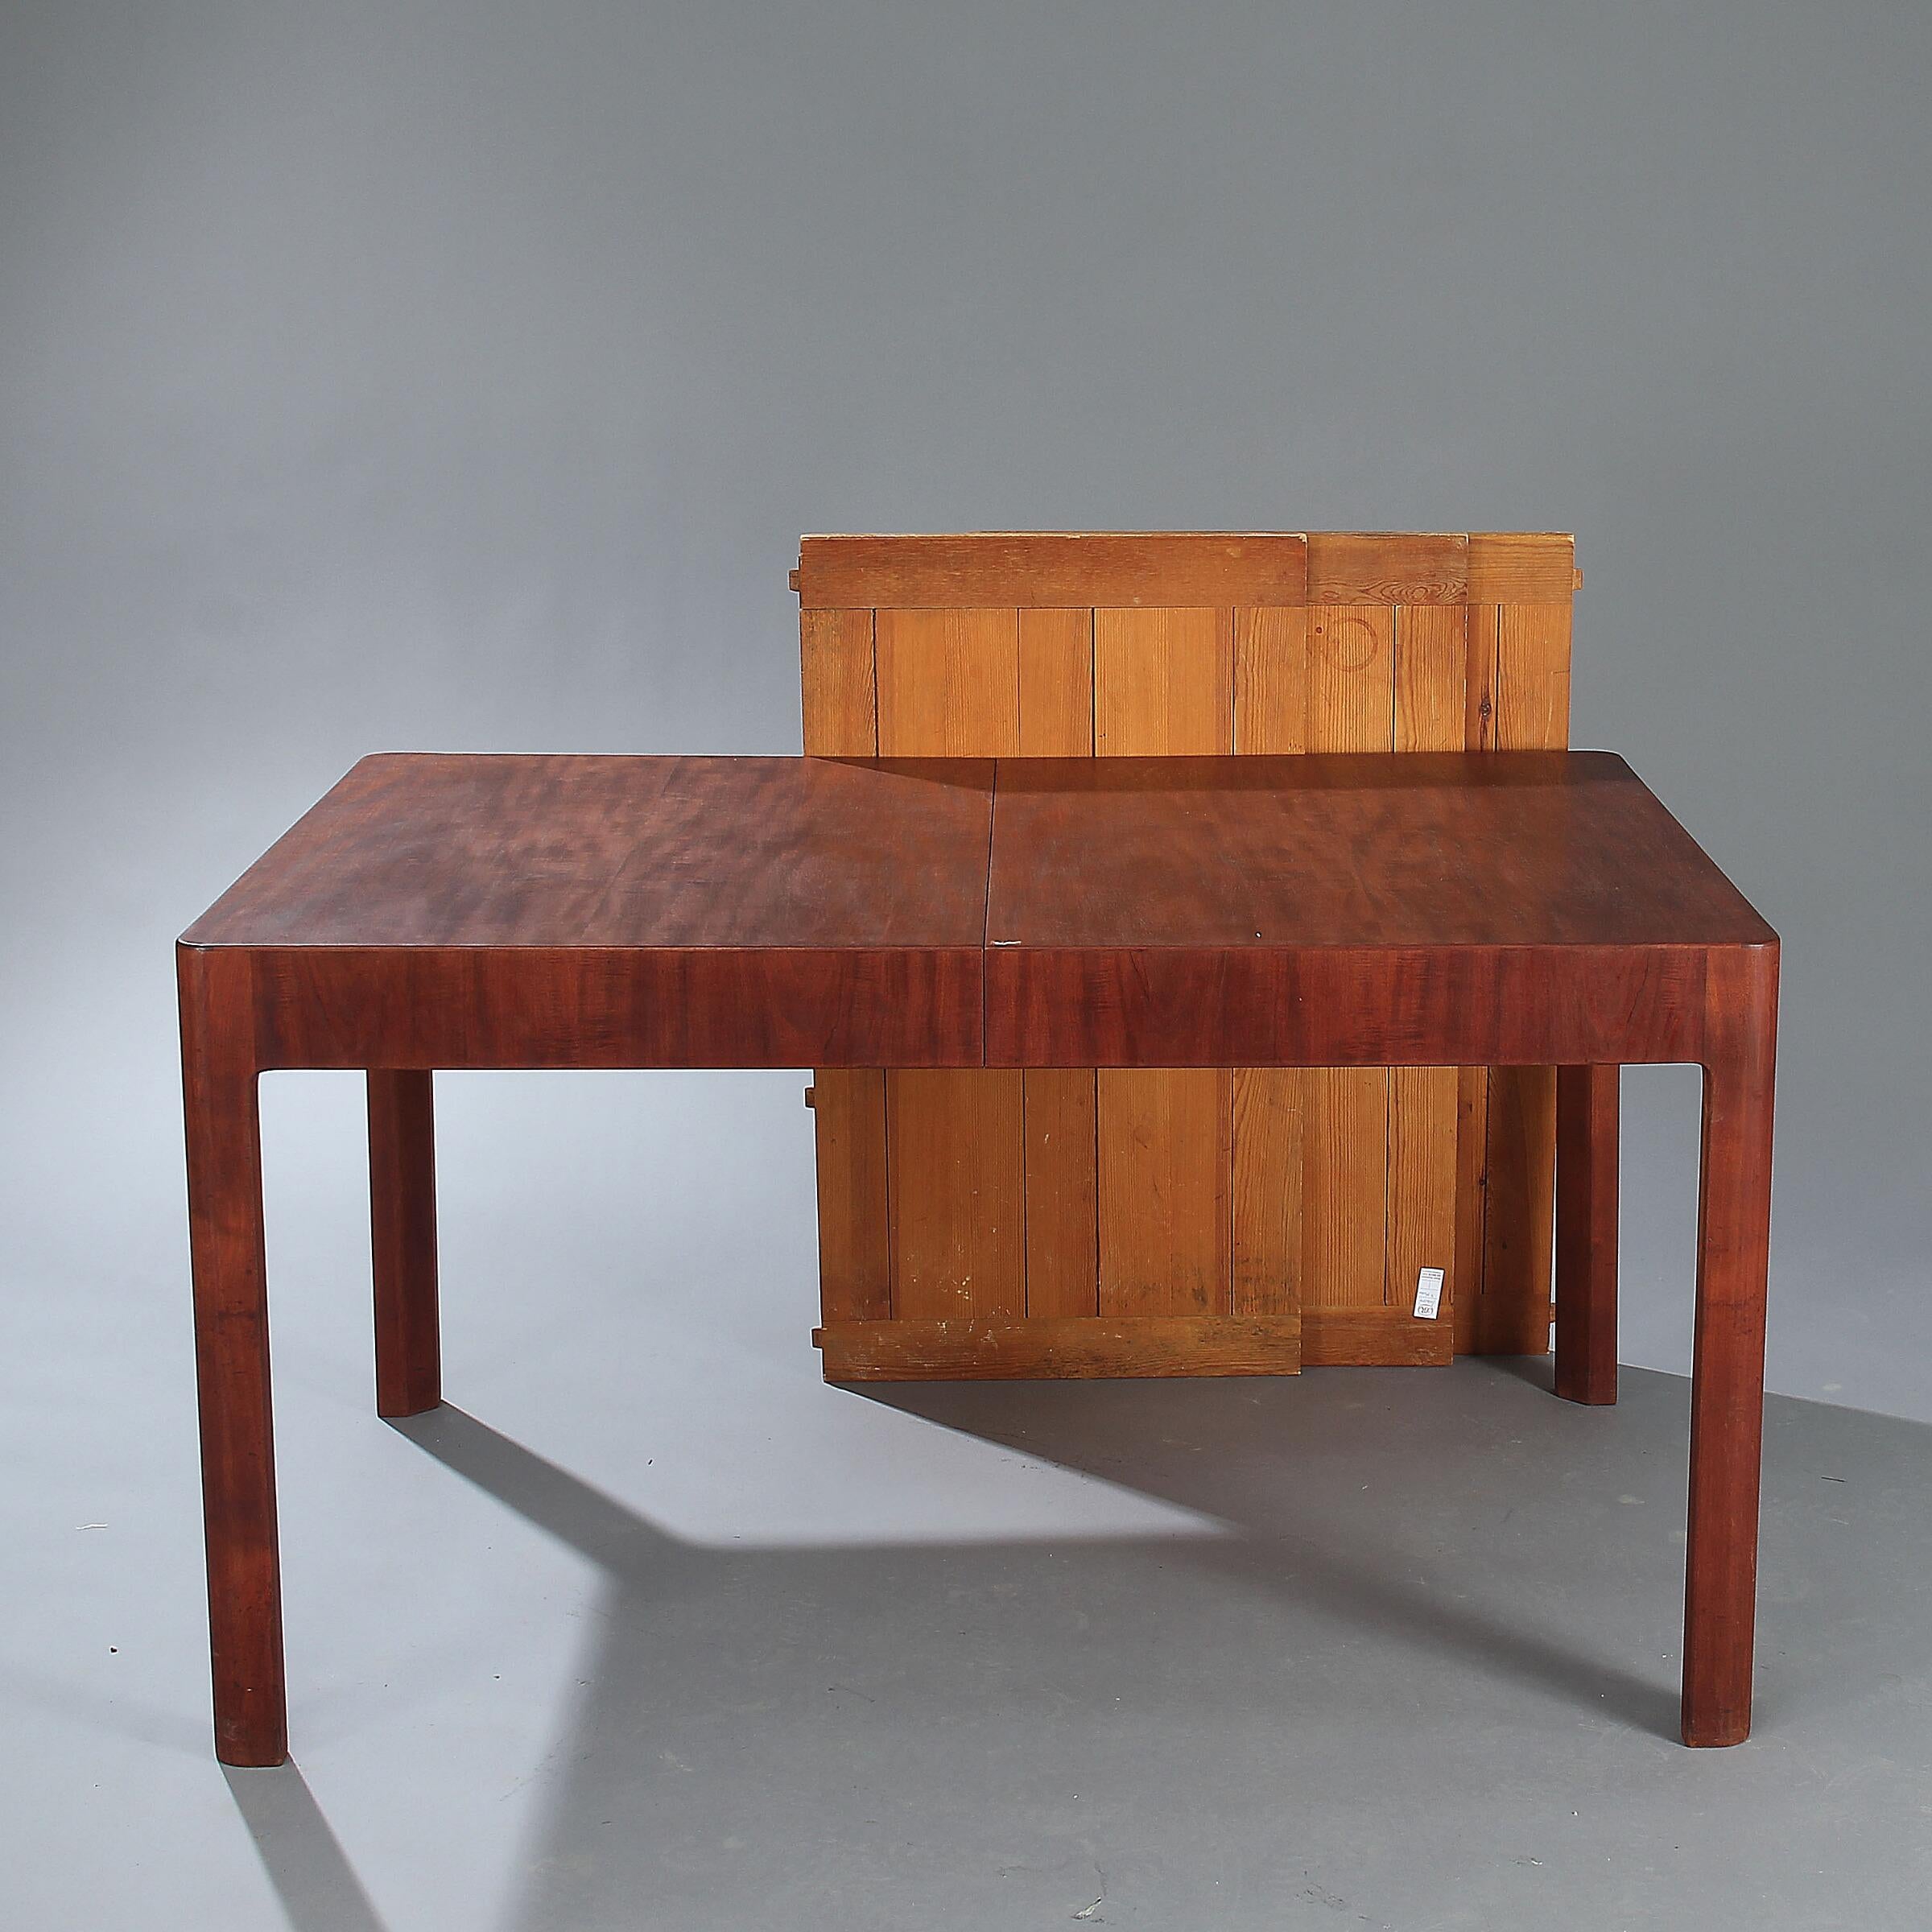 Rectangular dining table made of padouk wood with extension for three pine leaves (the pine leaves are of a different wood type and colour and assume a table cloth is used when extended). Made circa 1930s by cabinetmaker Jørgen Christensen. L.